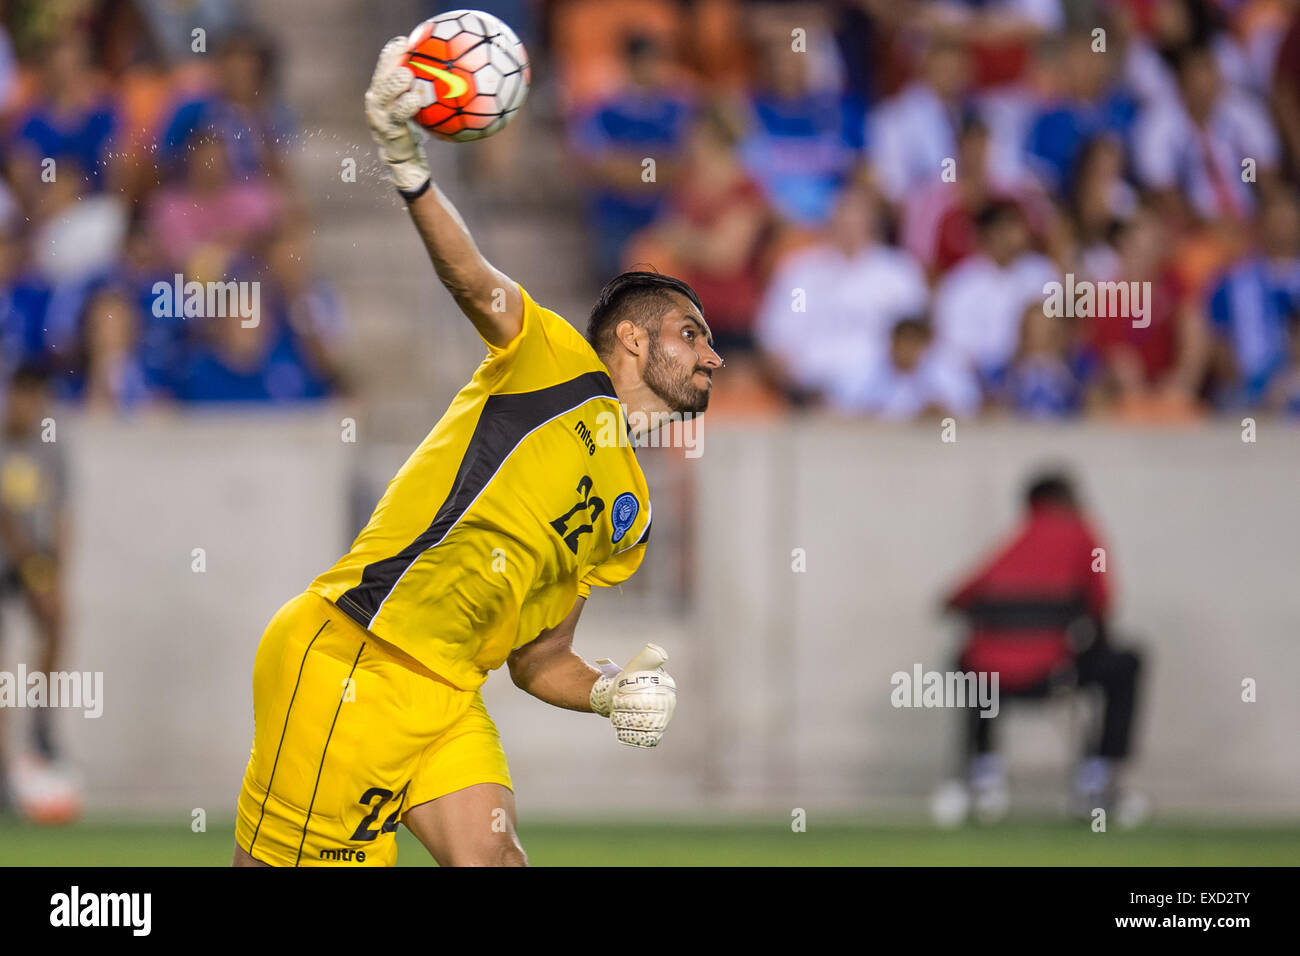 July 11, 2015: El Salvador goalkeeper Derby Carrillo (22) passes the ball during the 1st half of an international CONCACAF Gold Cup soccer match between Costa Rica and El Salvador at BBVA Compass Stadium in Houston, TX. The game ended in a 1-1 draw. Credit:  Cal Sport Media/Alamy Live News Stock Photo